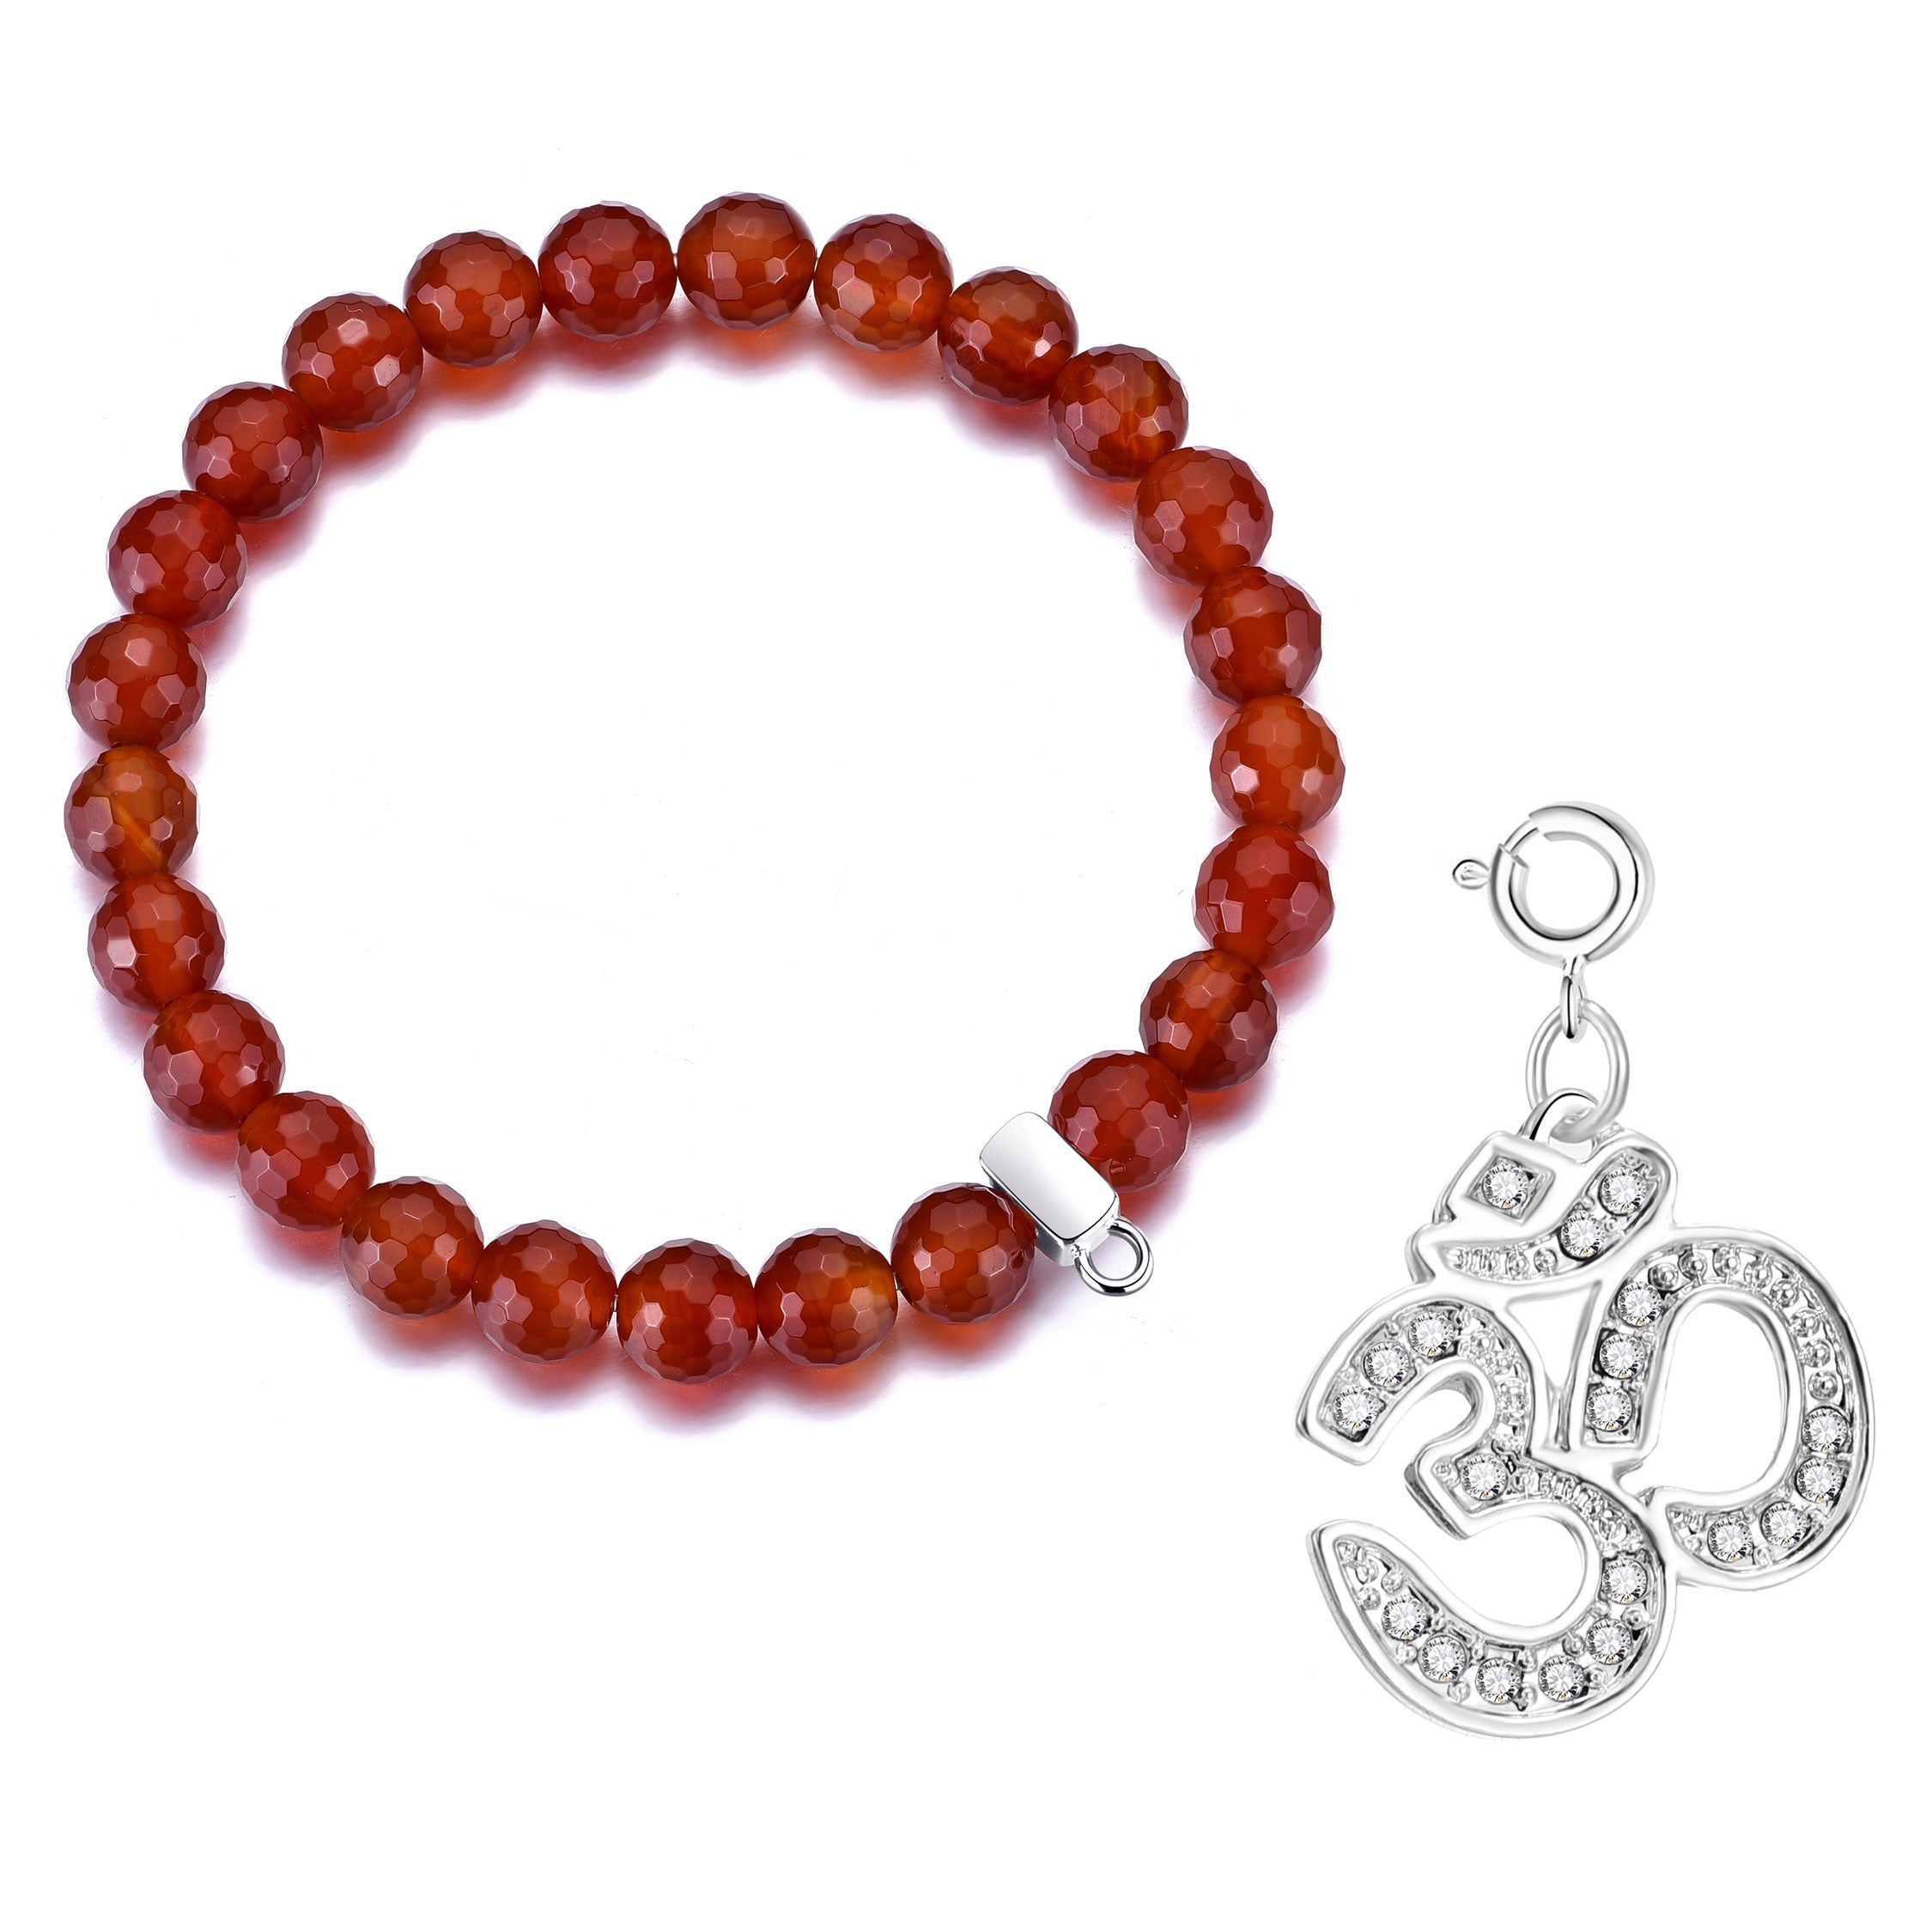 Faceted Carnelian Gemstone Stretch Bracelet with Charm Created with Zircondia® Crystals